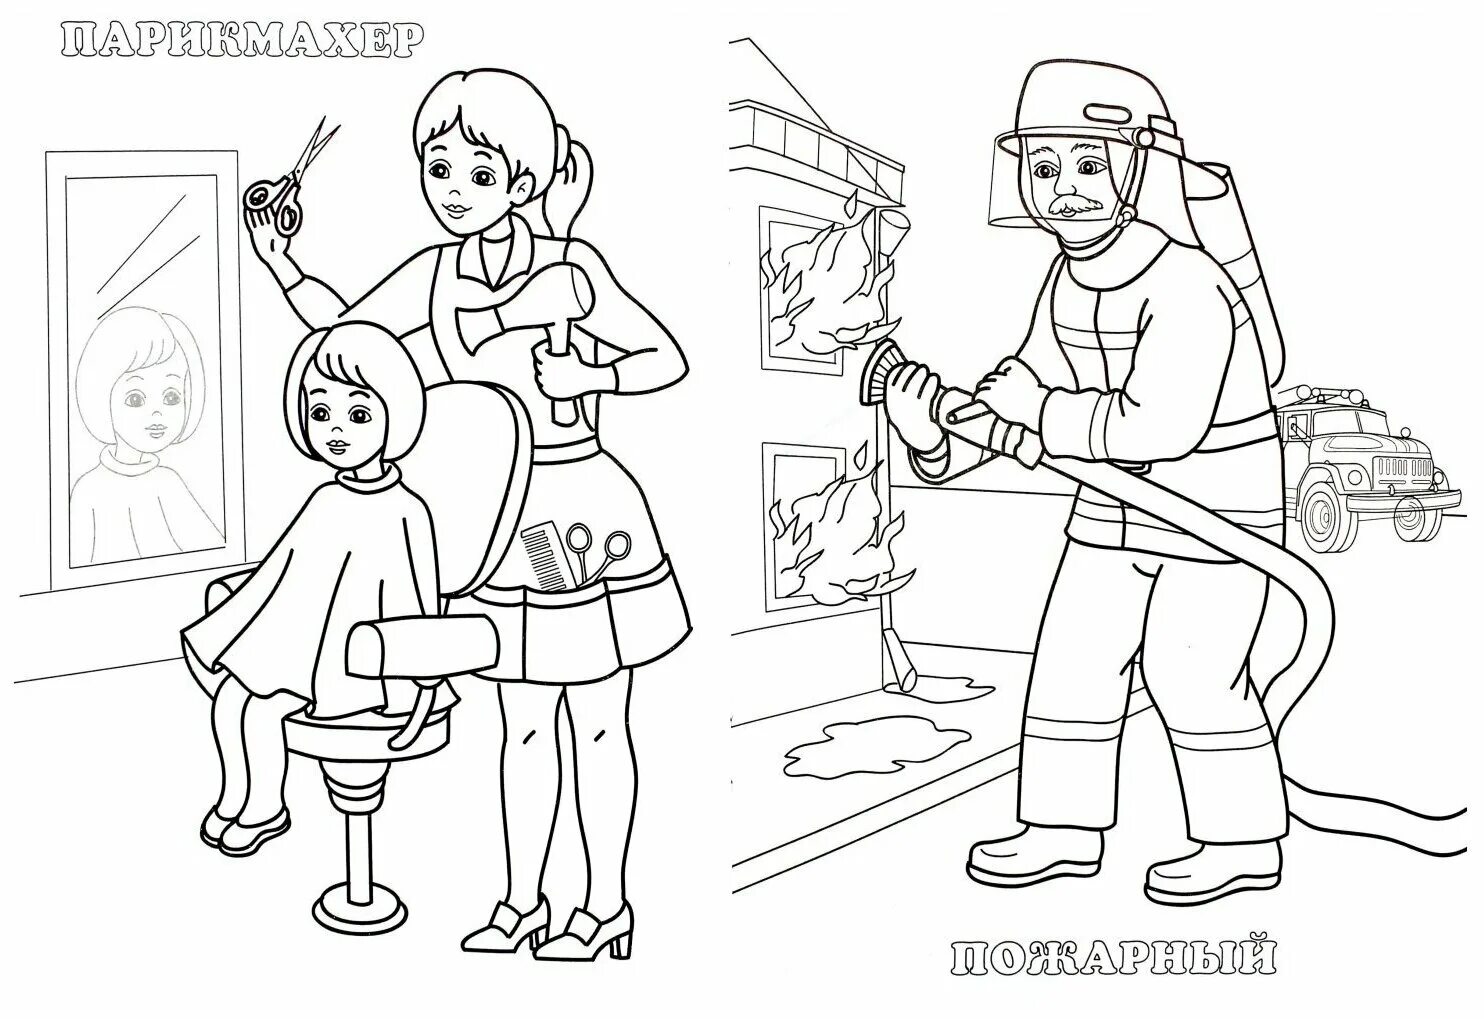 Modern 1st class profession coloring pages